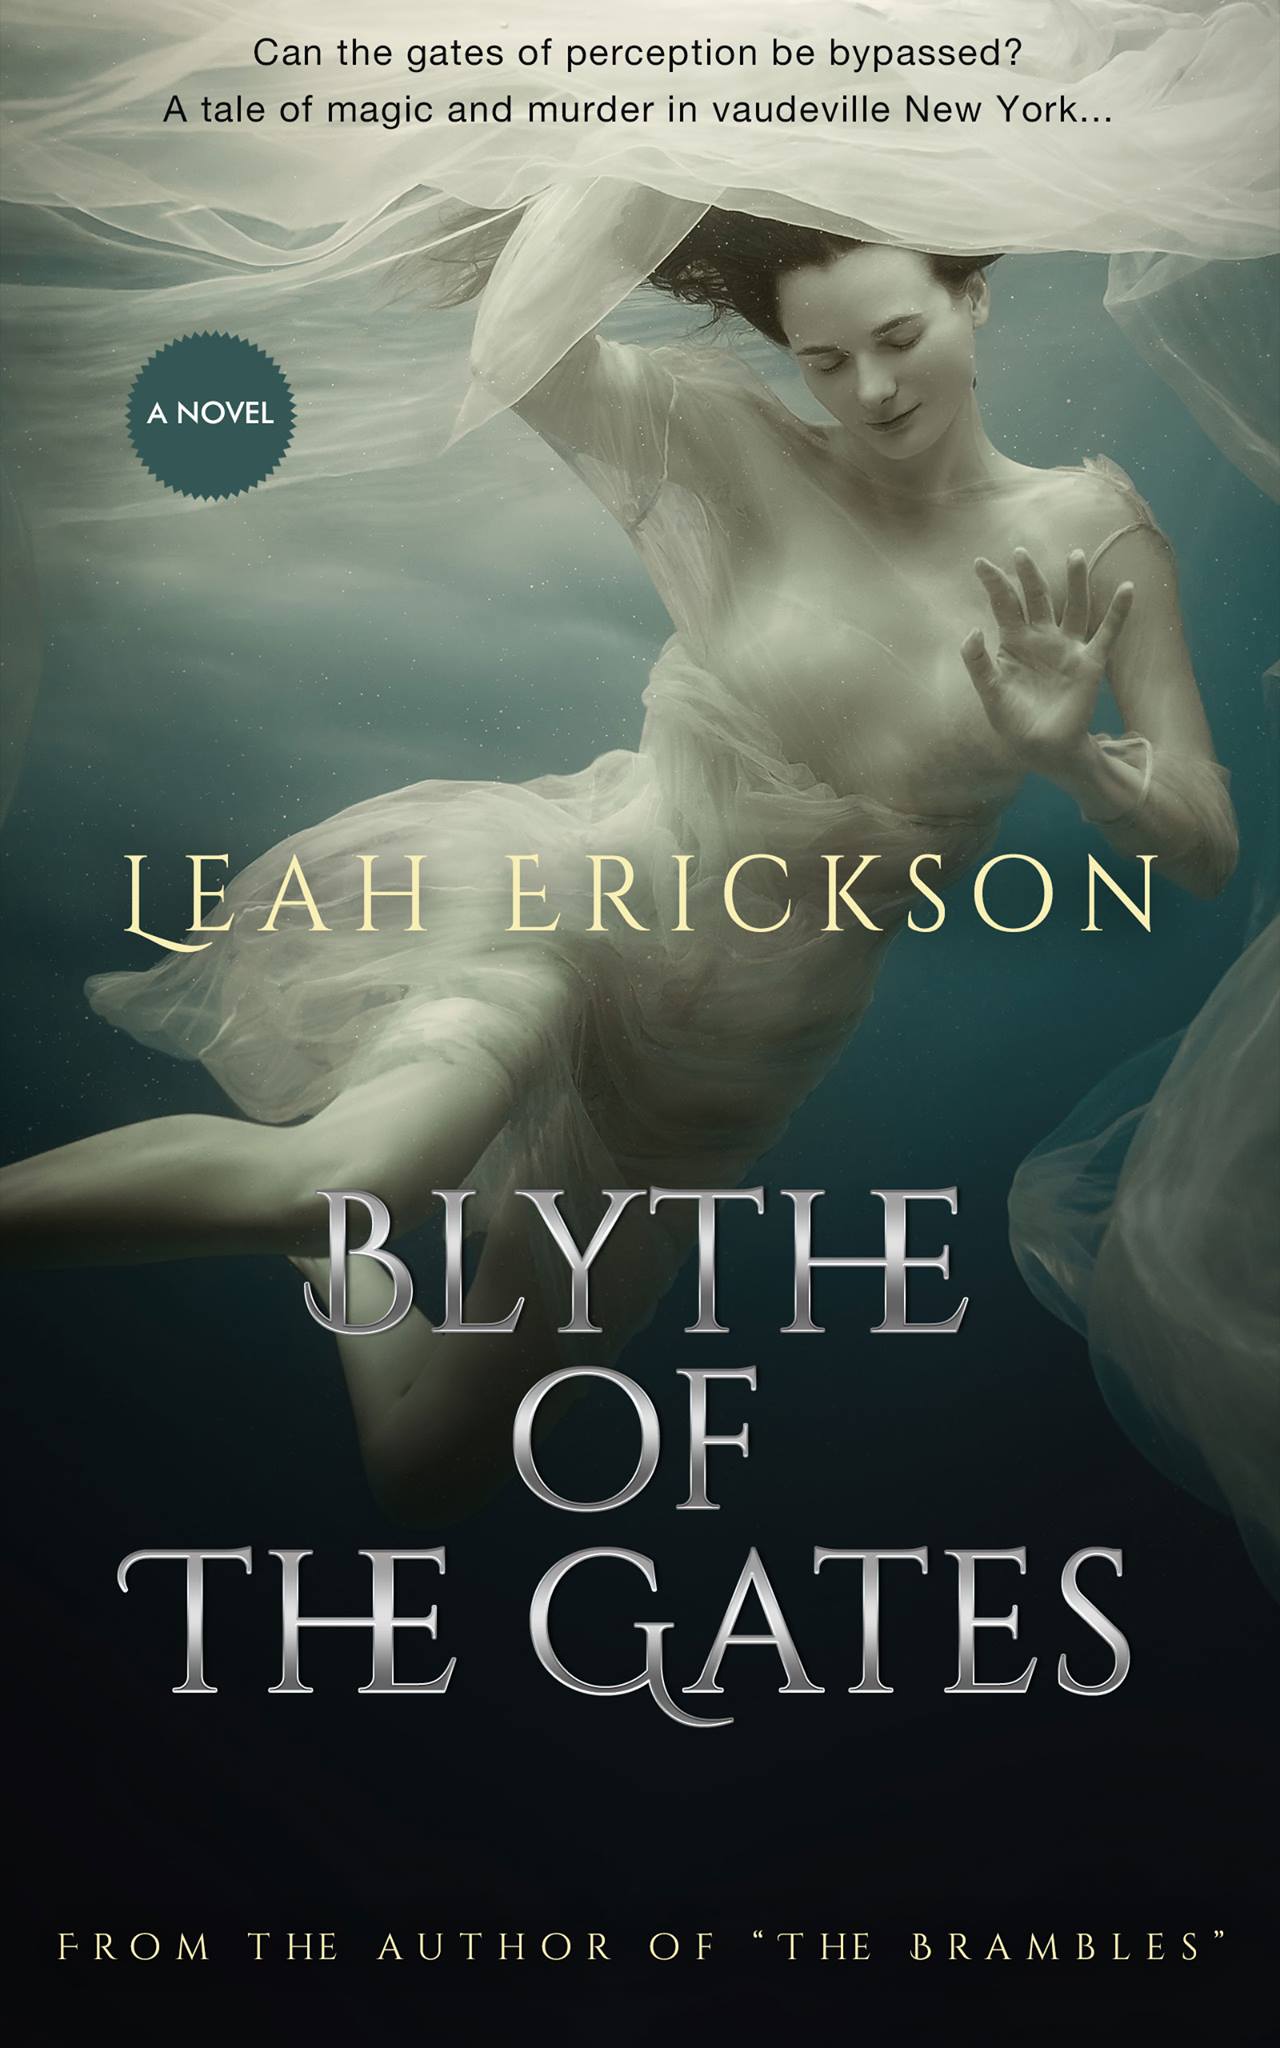 FREE: Blythe of the Gates by Leah Erickson